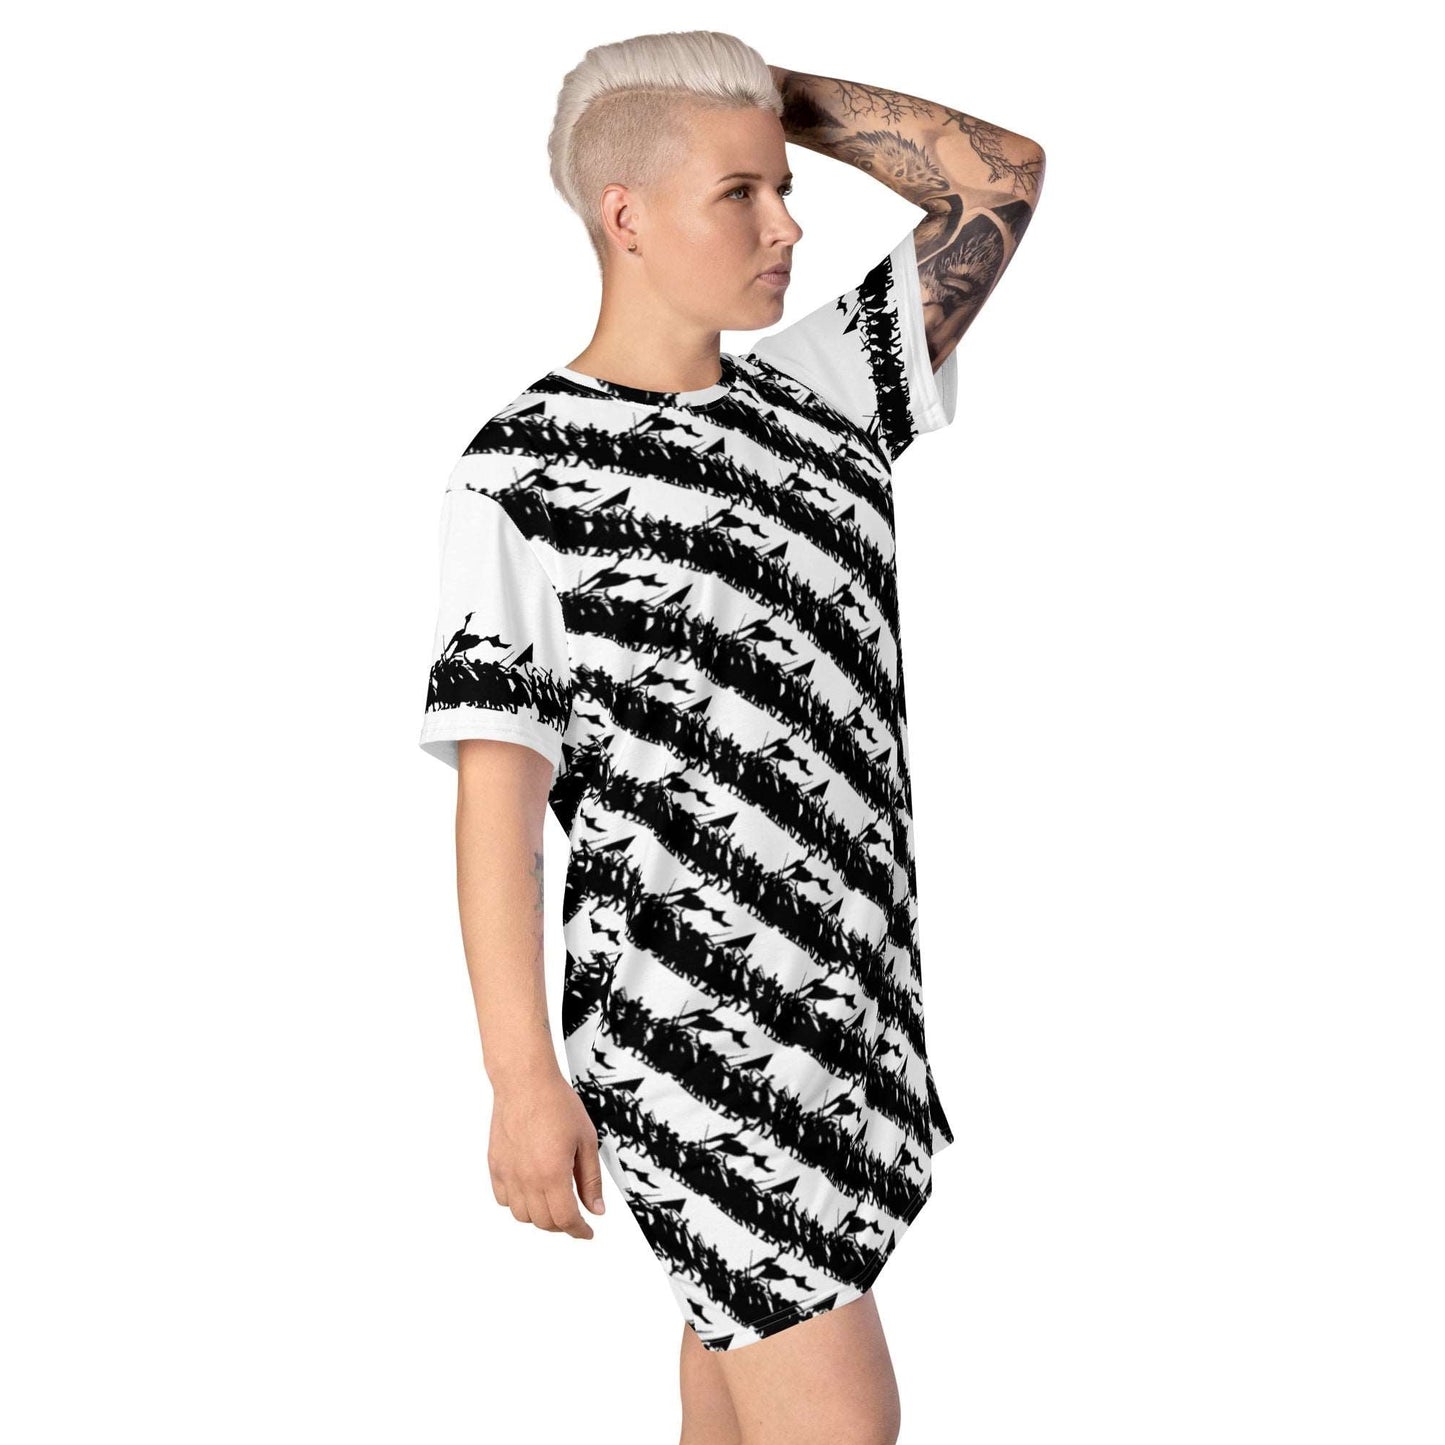 Protest - All-Over Print Dress - Souled Out World